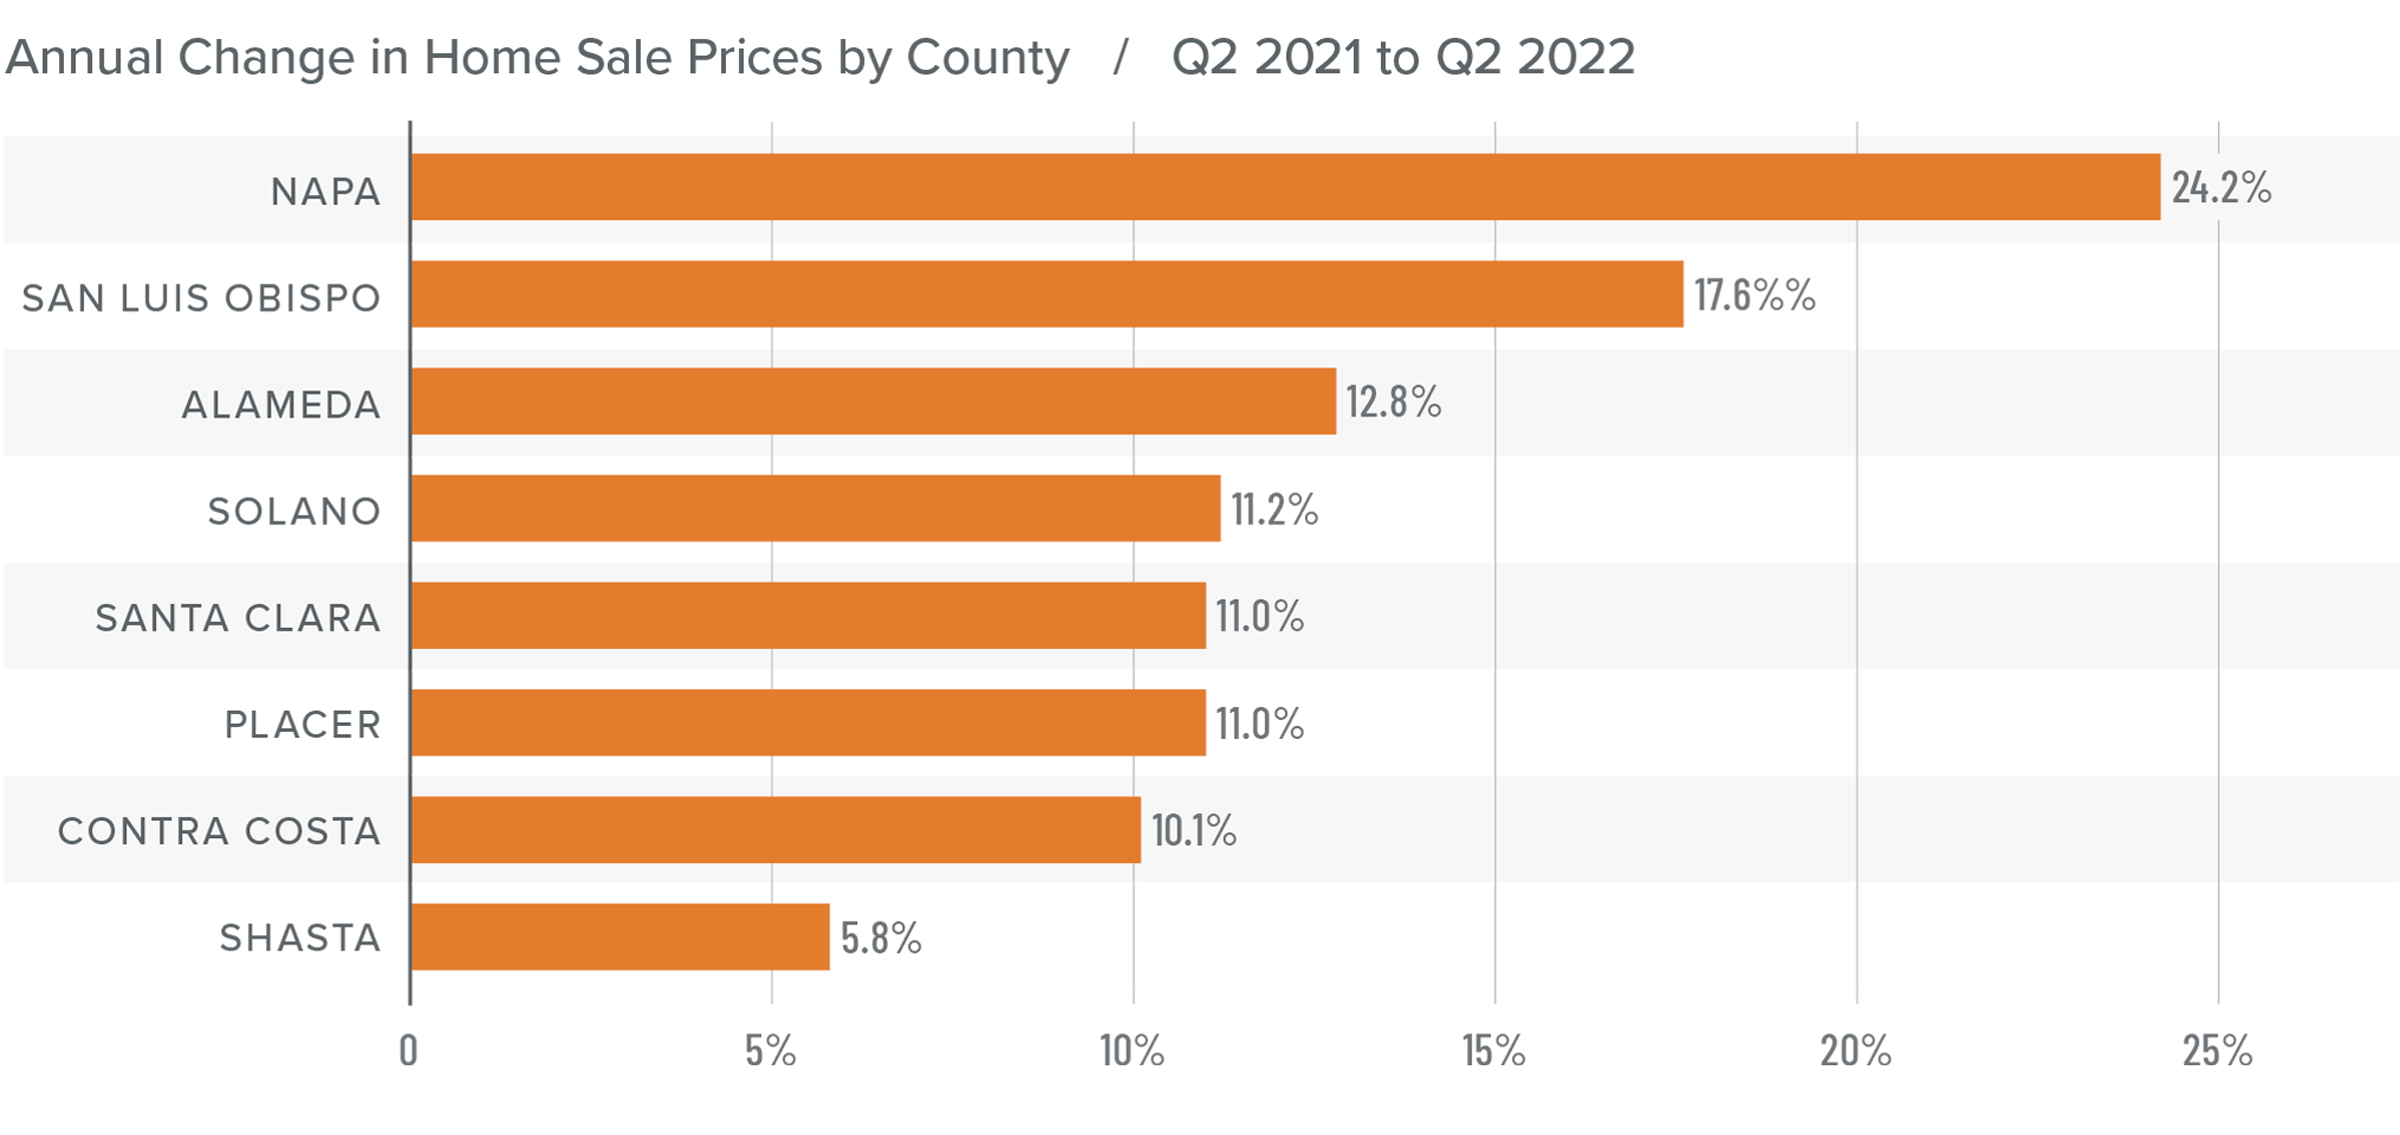 A bar graph showing the annual change in home sale prices for various counties in Northern California from Q2 2021 to Q2 2022. Napa County tops the list at 24.2%, followed by San Luis Obispo at 17.6%, Alameda at 12.8%, Solano at 11.2%, Santa Clara and Placer at 11%, Contra Costa at 10.1%, and Shasta at 5.8%.